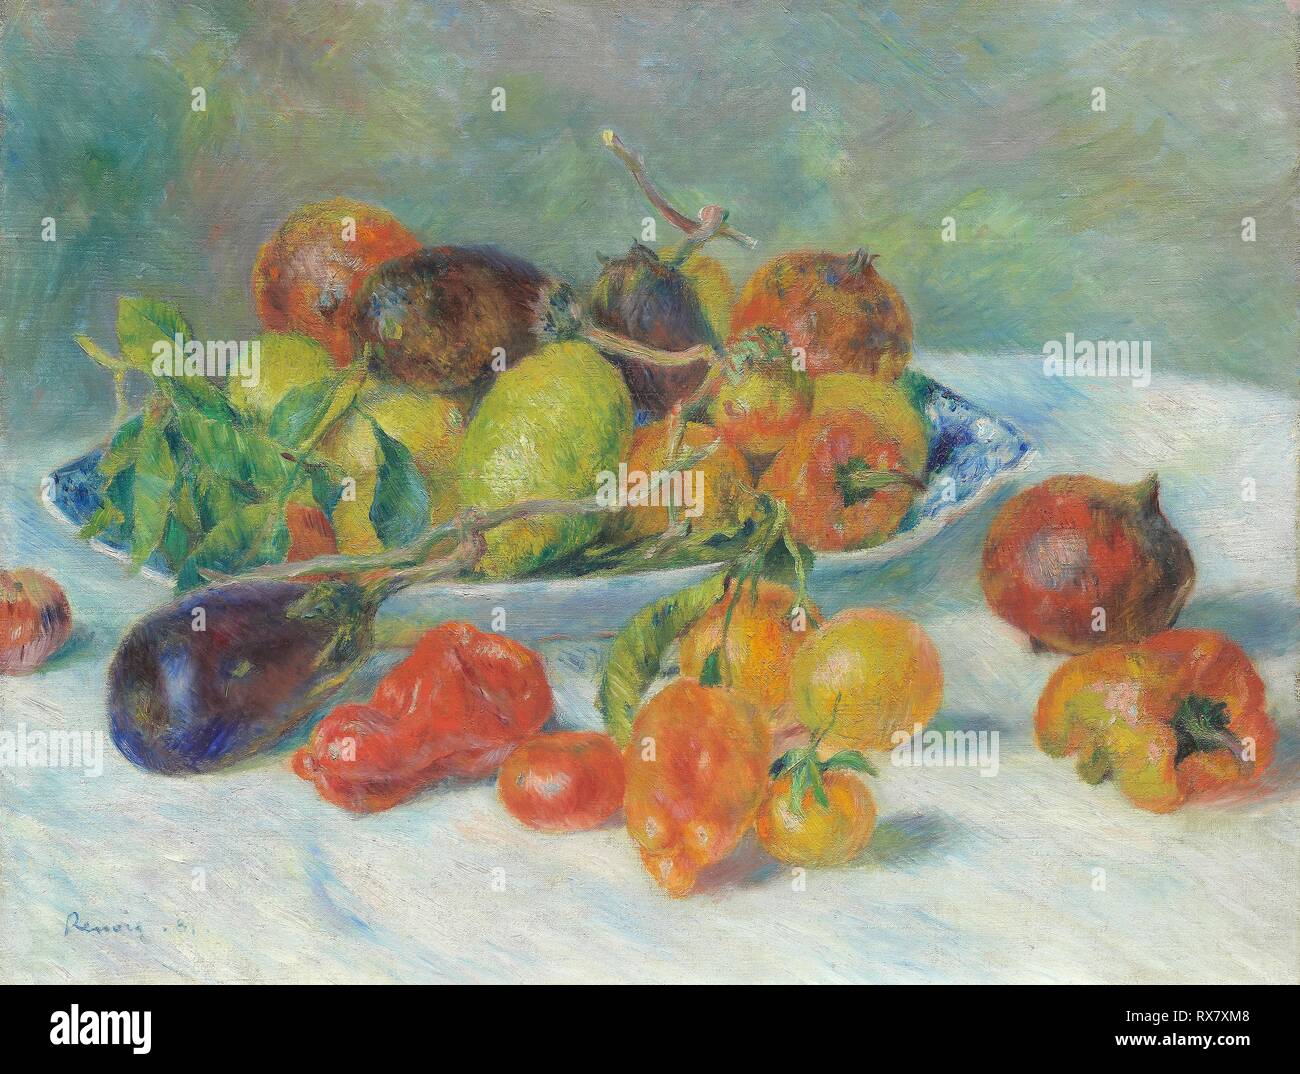 Fruits of the Midi. Pierre-Auguste Renoir; French, 1841-1919. Date: 1881. Dimensions: 51 × 65 cm (20 1/16 × 25 5/8 in.). Oil on canvas. Origin: France. Museum: The Chicago Art Institute. Stock Photo